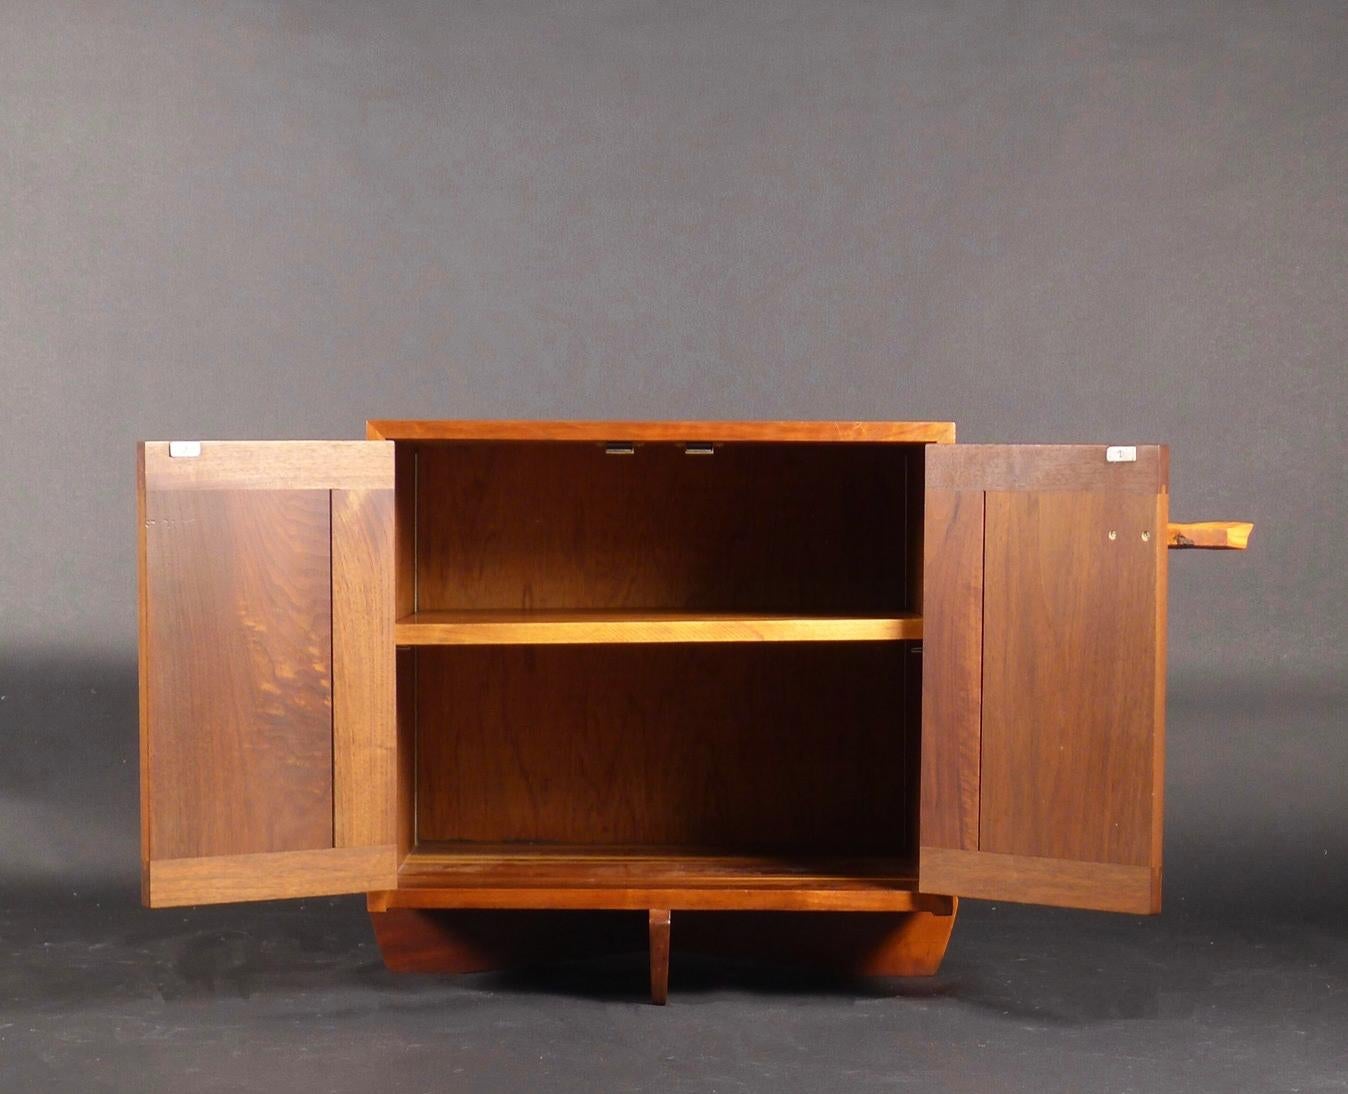 George Nakashima, Kornblut Cabinet in American Black Walnut, 1972, New Hope USA In Good Condition For Sale In Wargrave, Berkshire